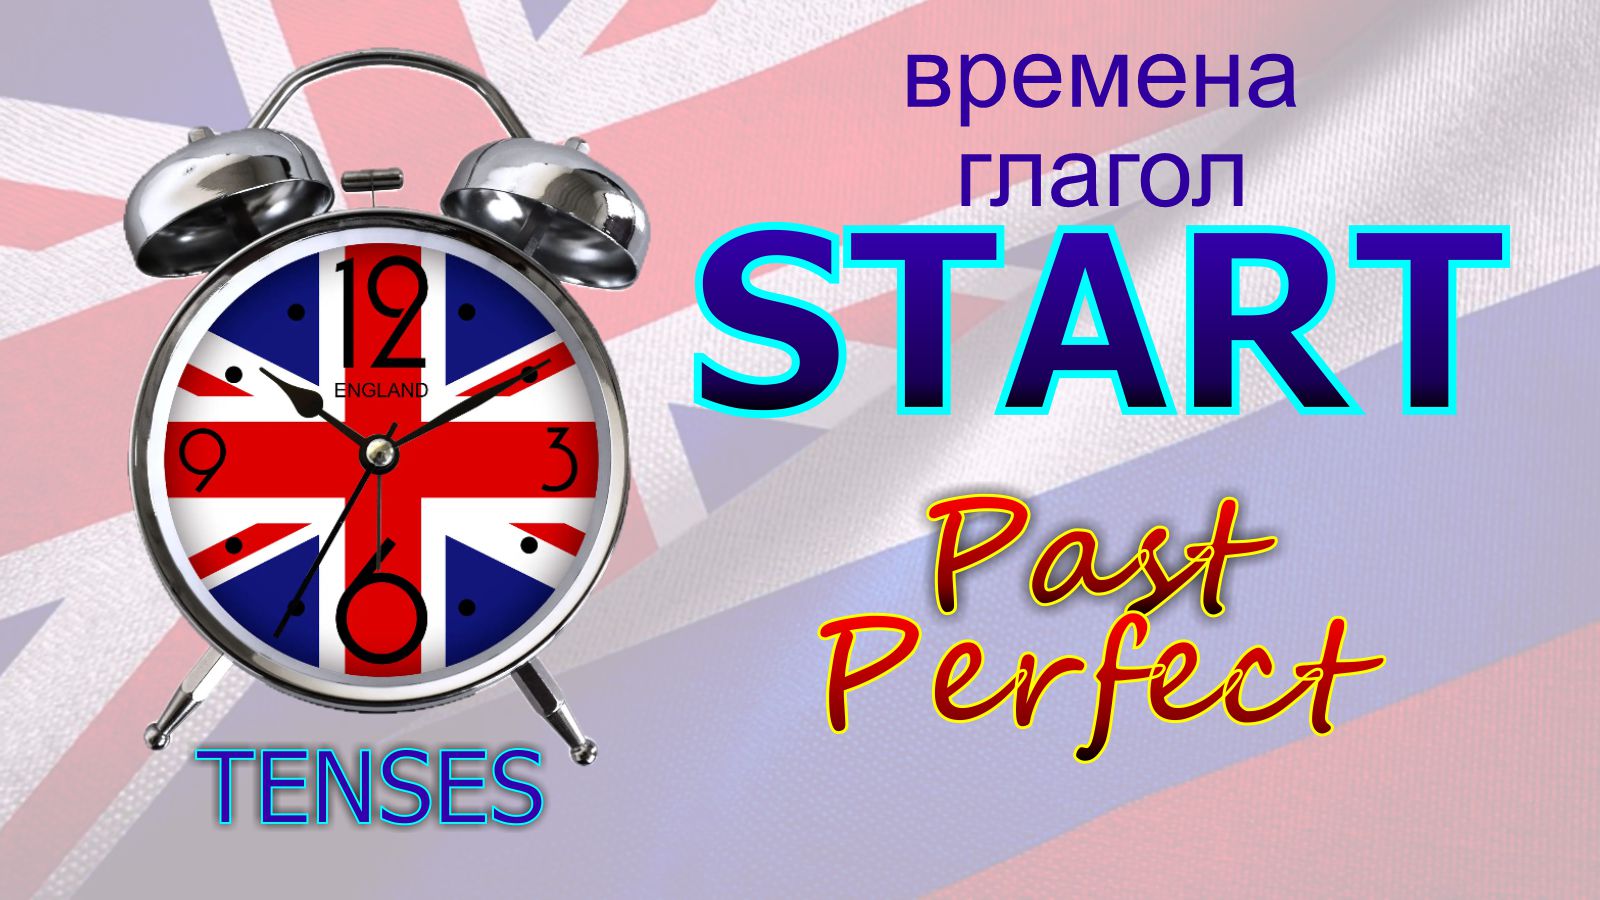 Времена. Глагол to START. Past Perfect